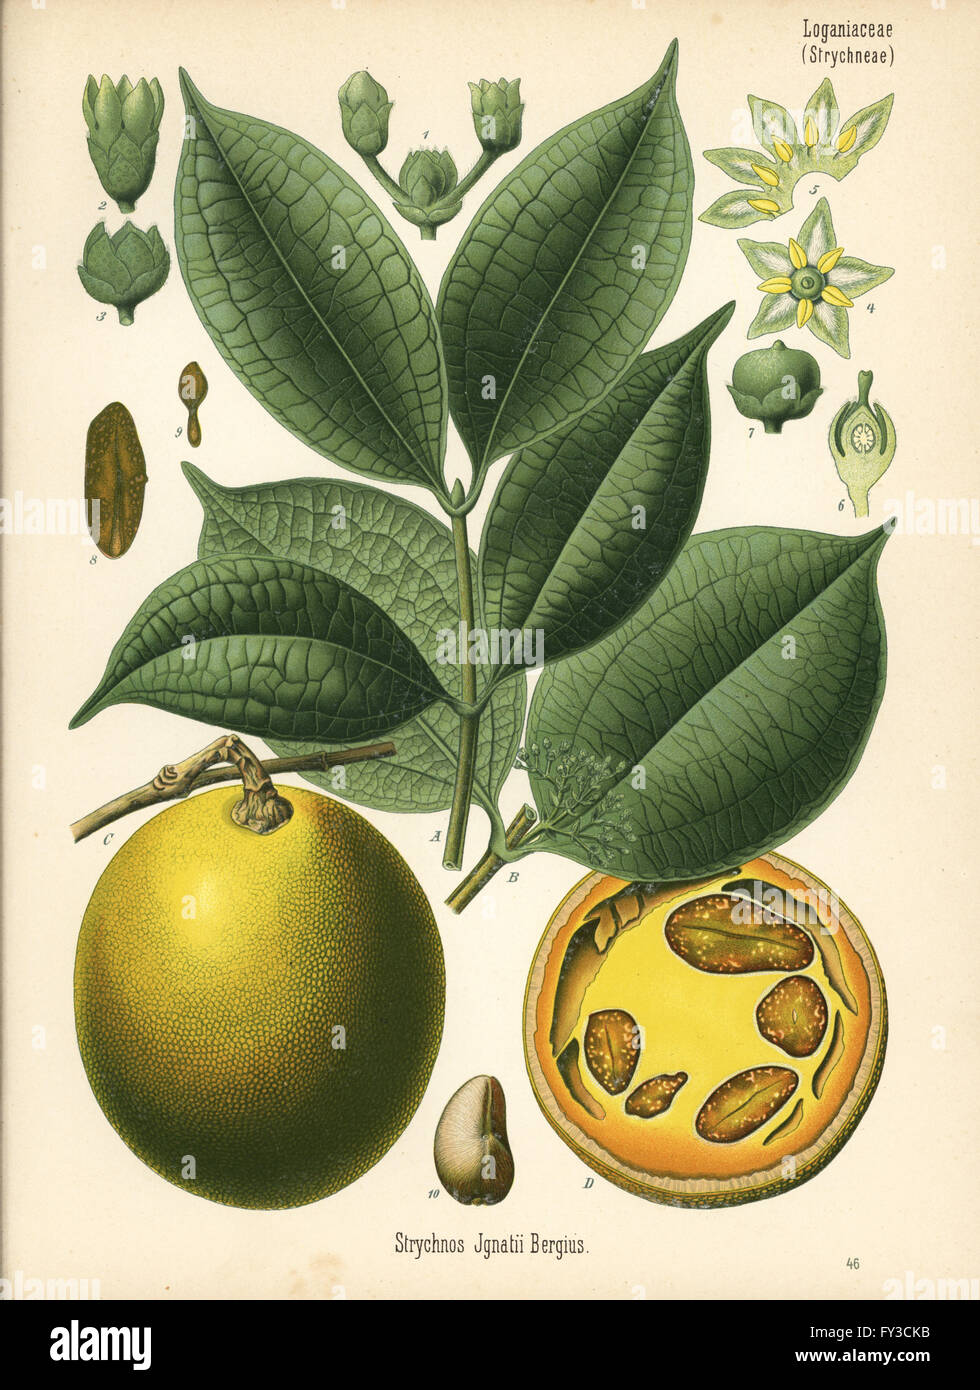 St. Ignatius bean, Strychnos ignatii. Chromolithograph after a botanical illustration from Hermann Adolph Koehler's Medicinal Plants, edited by Gustav Pabst, Koehler, Germany, 1887. Stock Photo